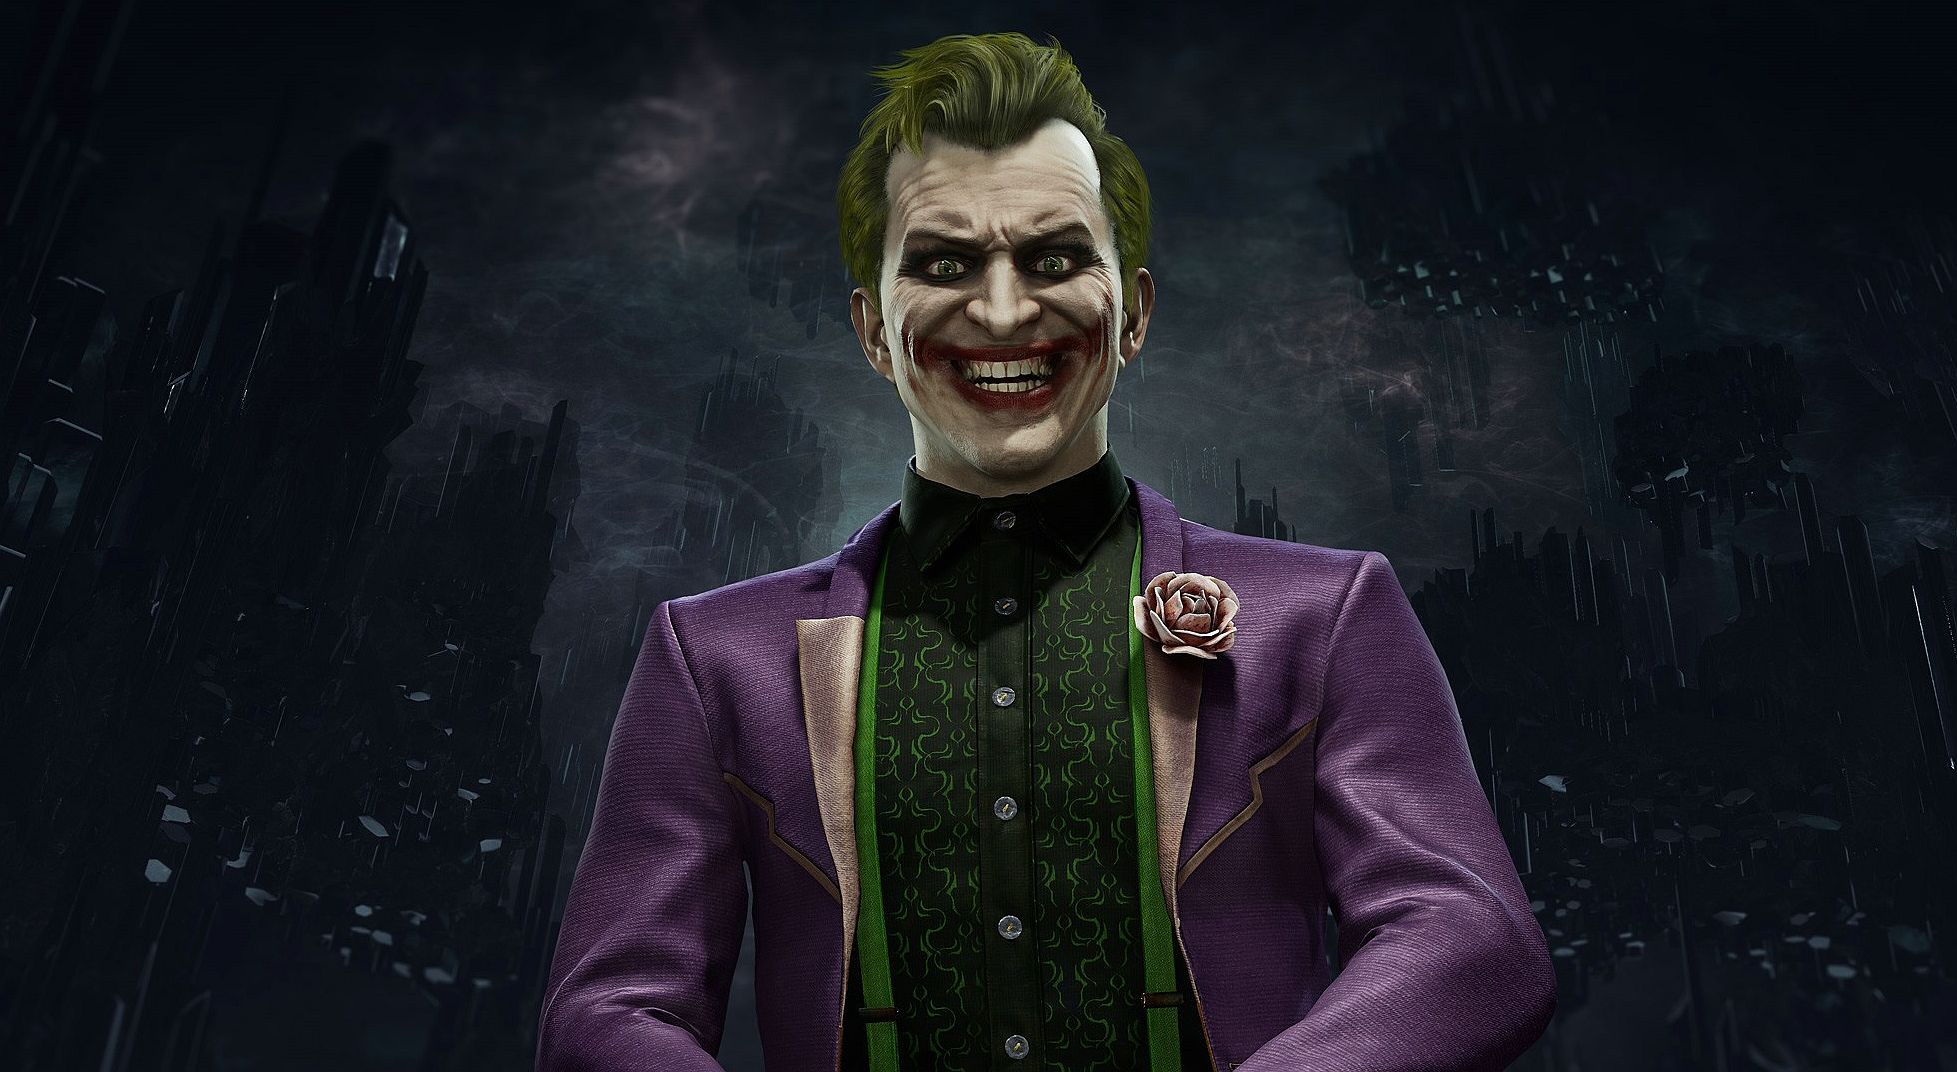 Image for Check out the Joker in this Mortal Kombat 11 gameplay trailer